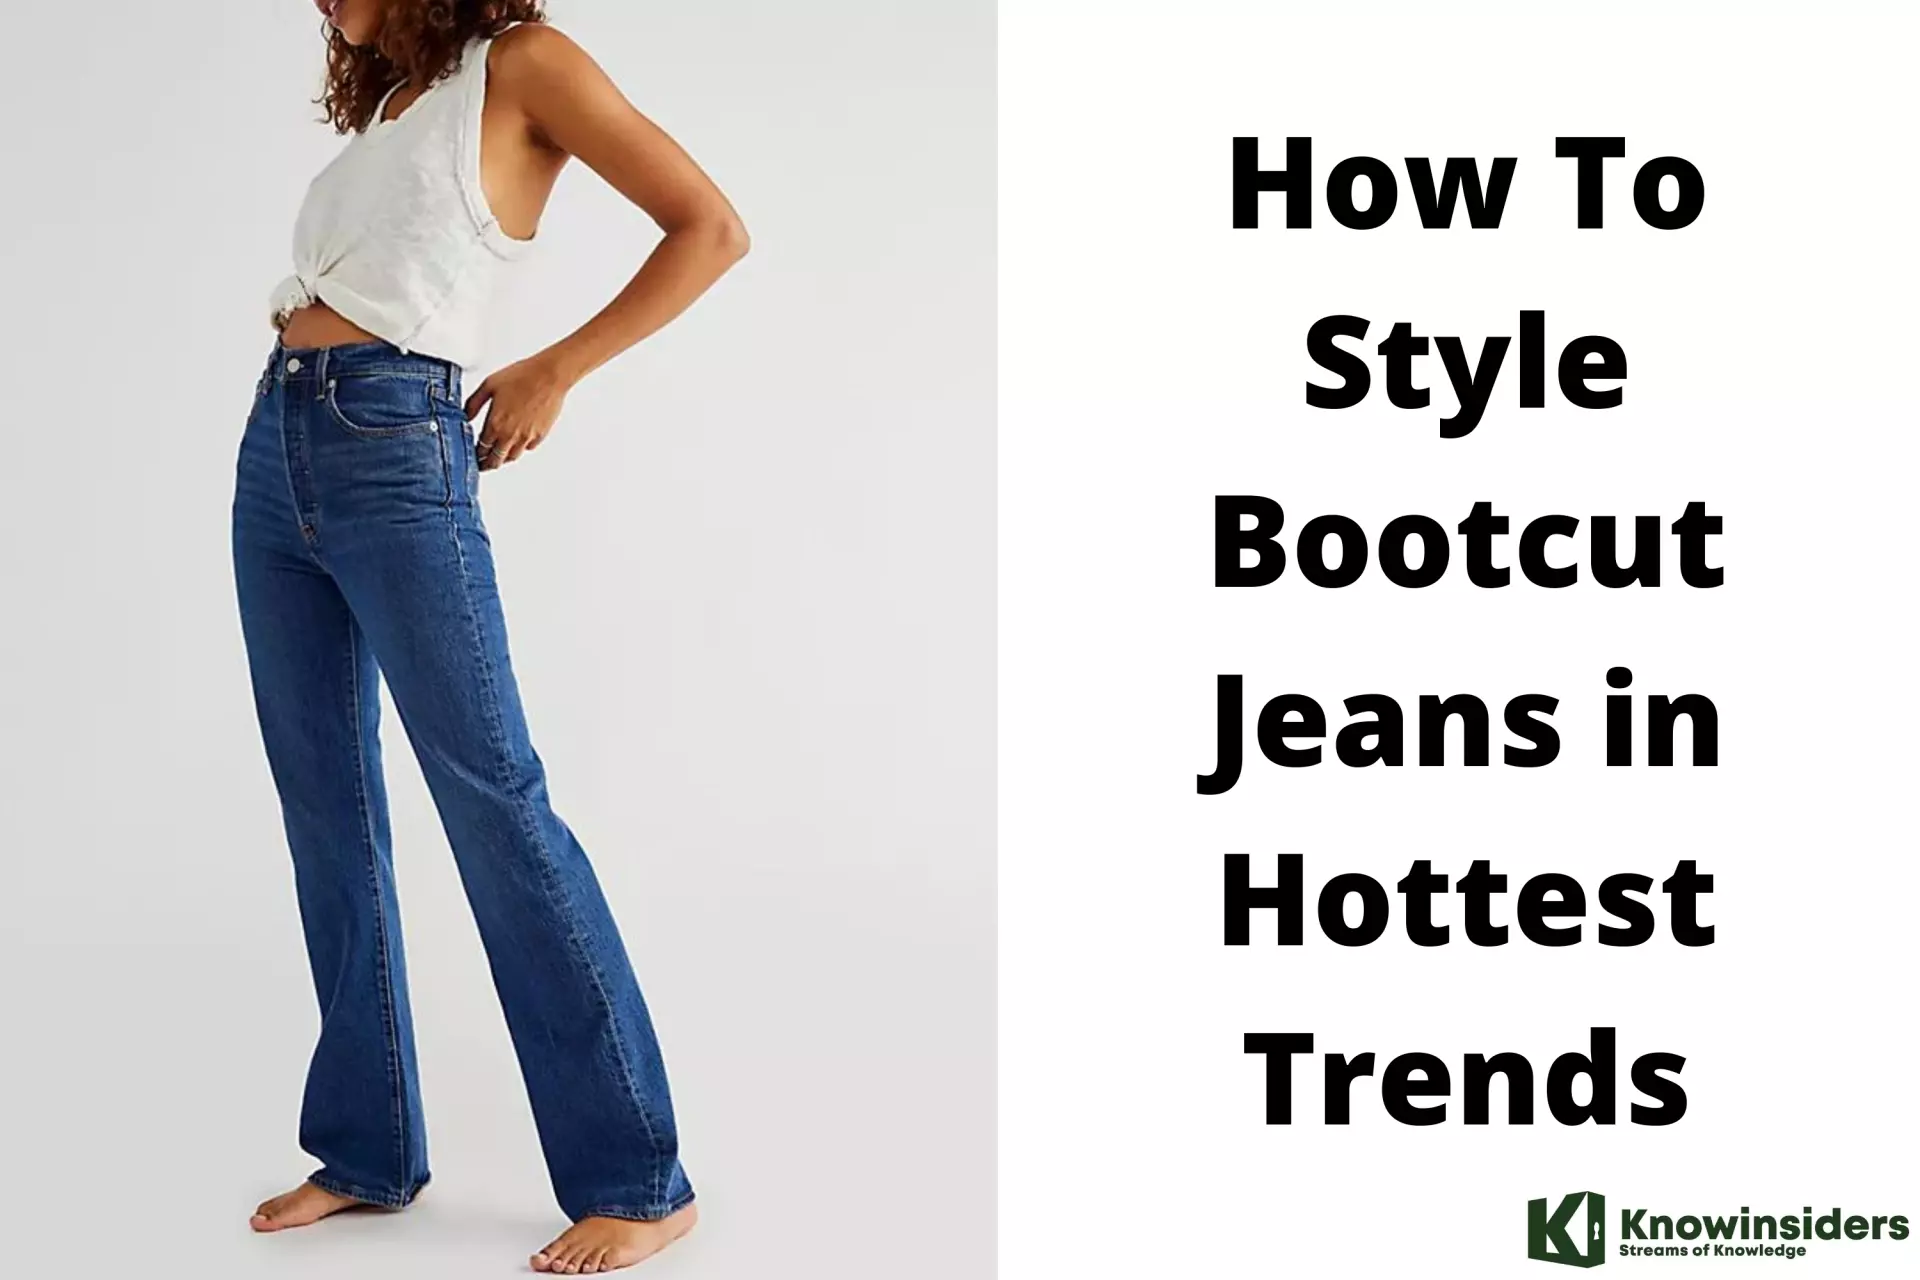 You can show some skin in a strapless top and short, unbuttoned and rolled-down denim cut-offs